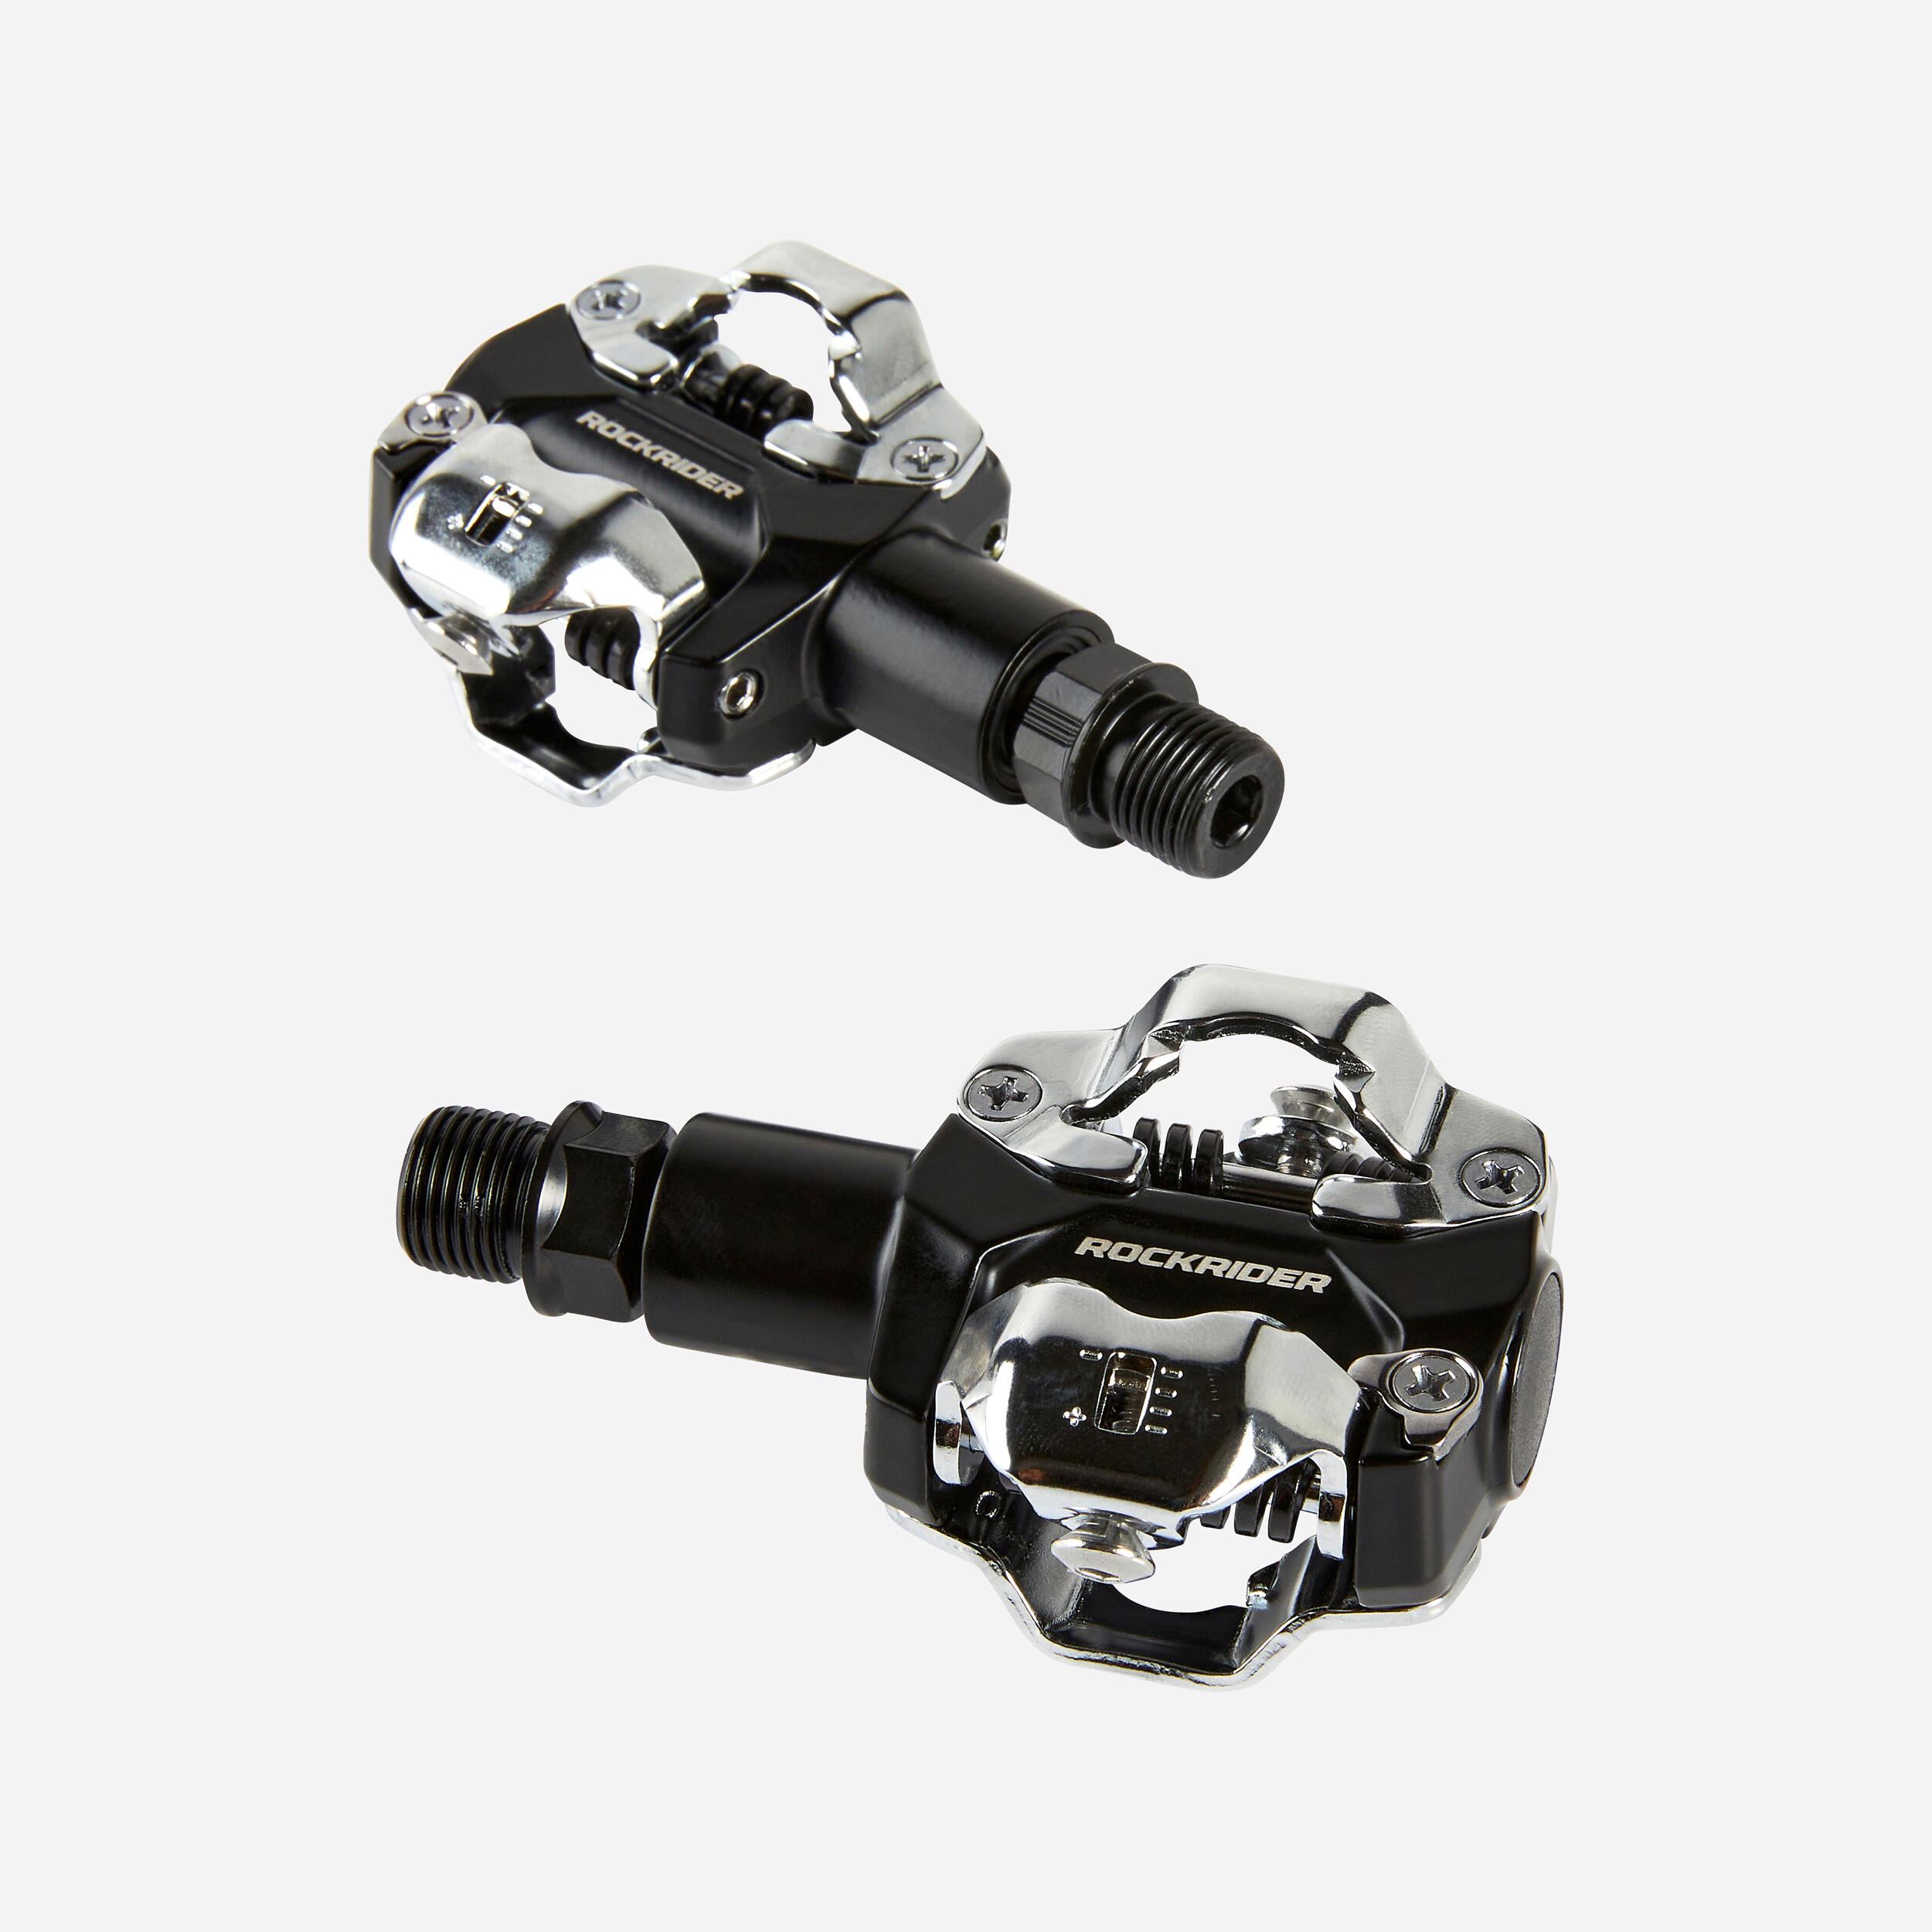 Clipless Mountain Bike Pedals 520 - Black 1/8